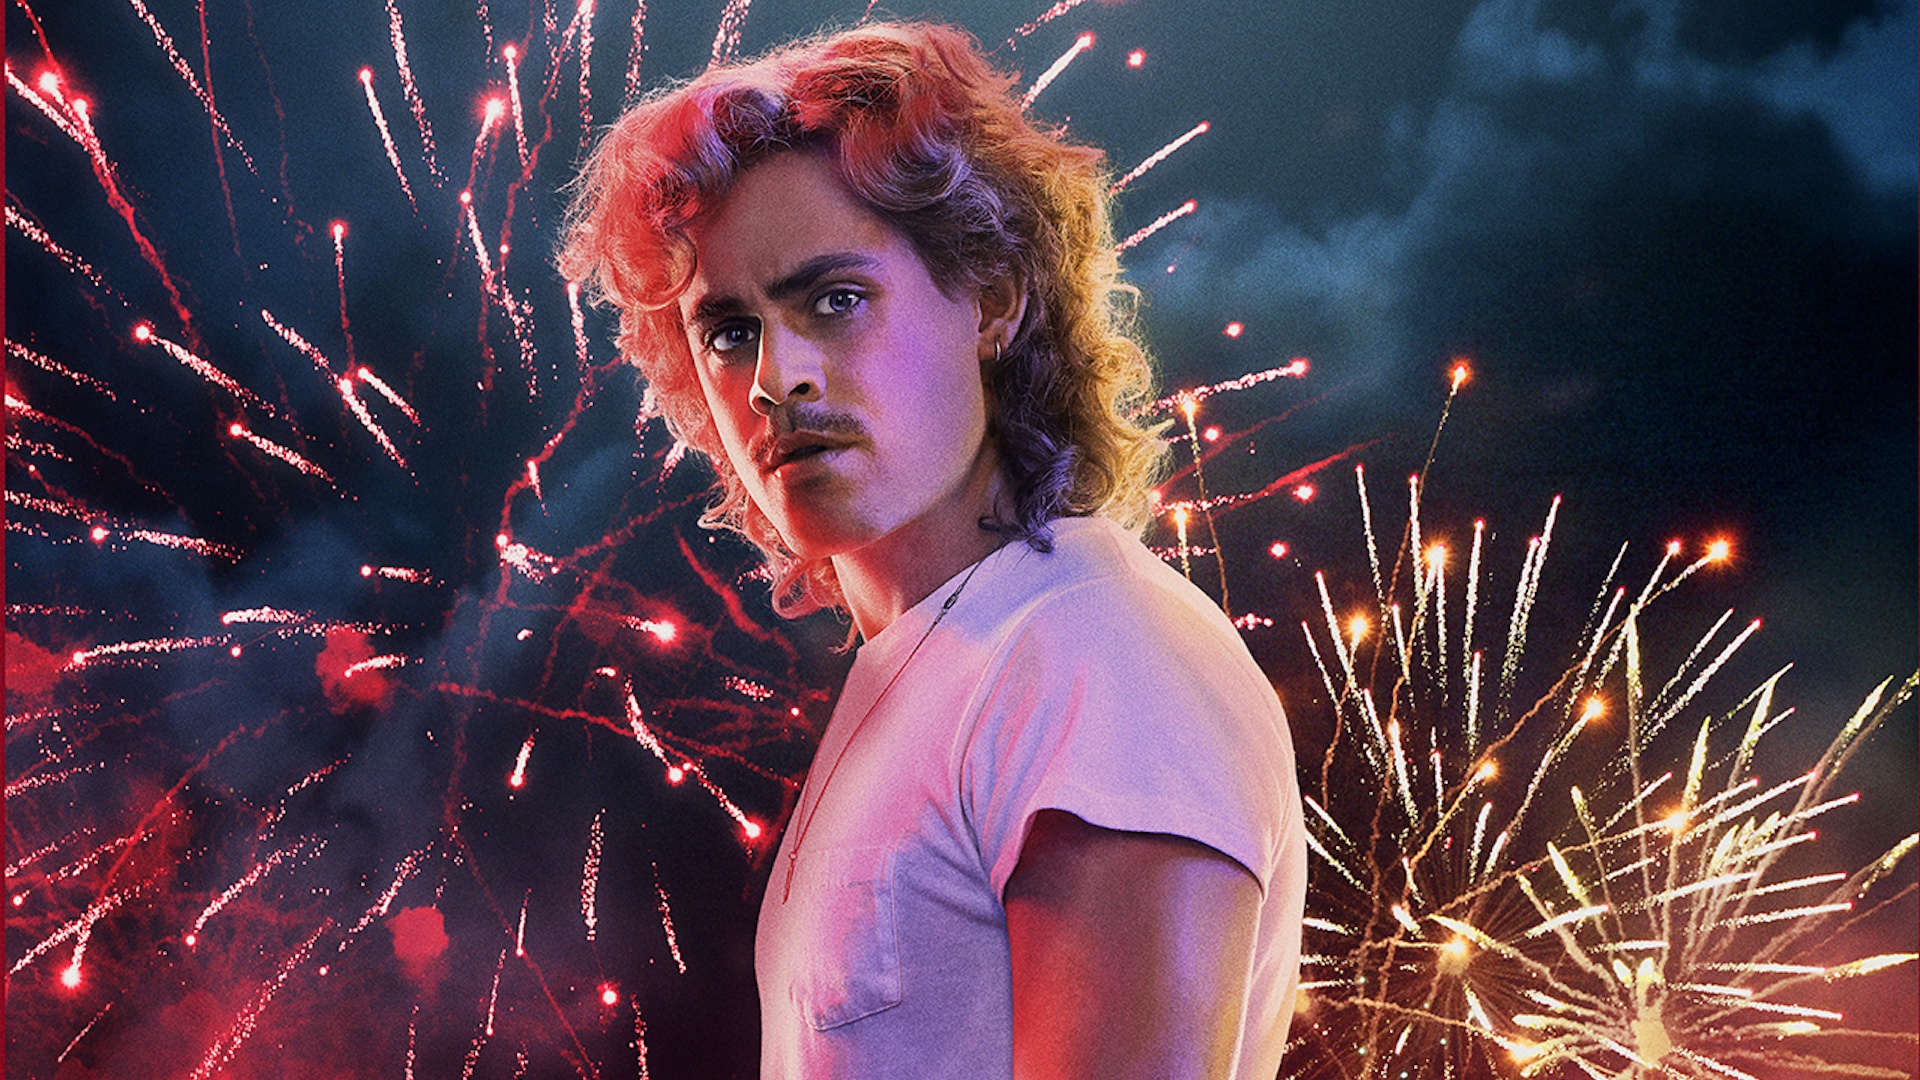 ‘Stranger Things’ Star Dacre Montgomery Answers YOUR Questions Live on Camera